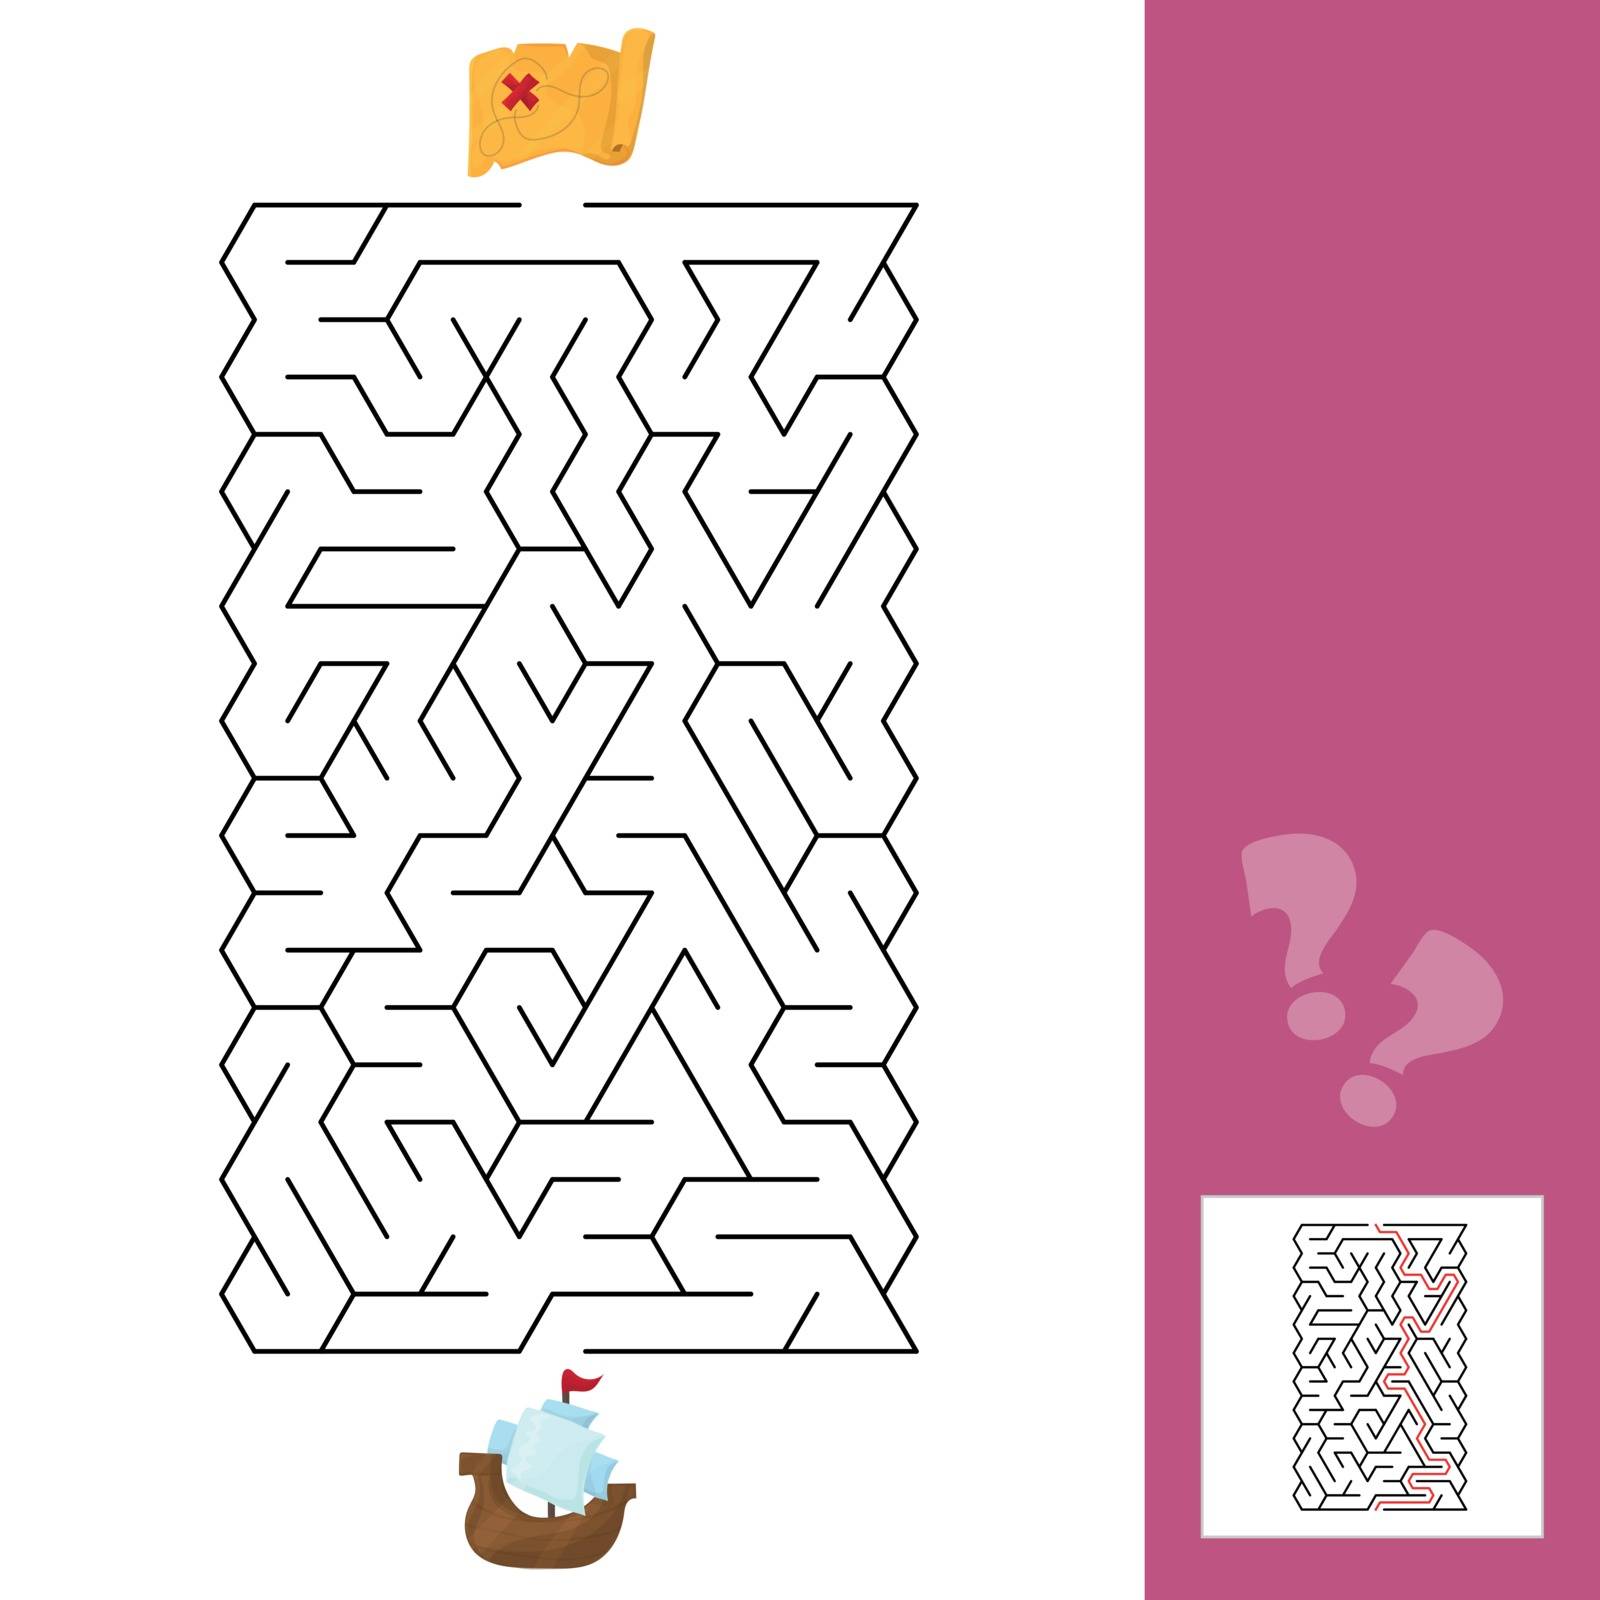 Maze. The ship - Children s game labyrinth. Kids puzzle with answer. Vector illustration